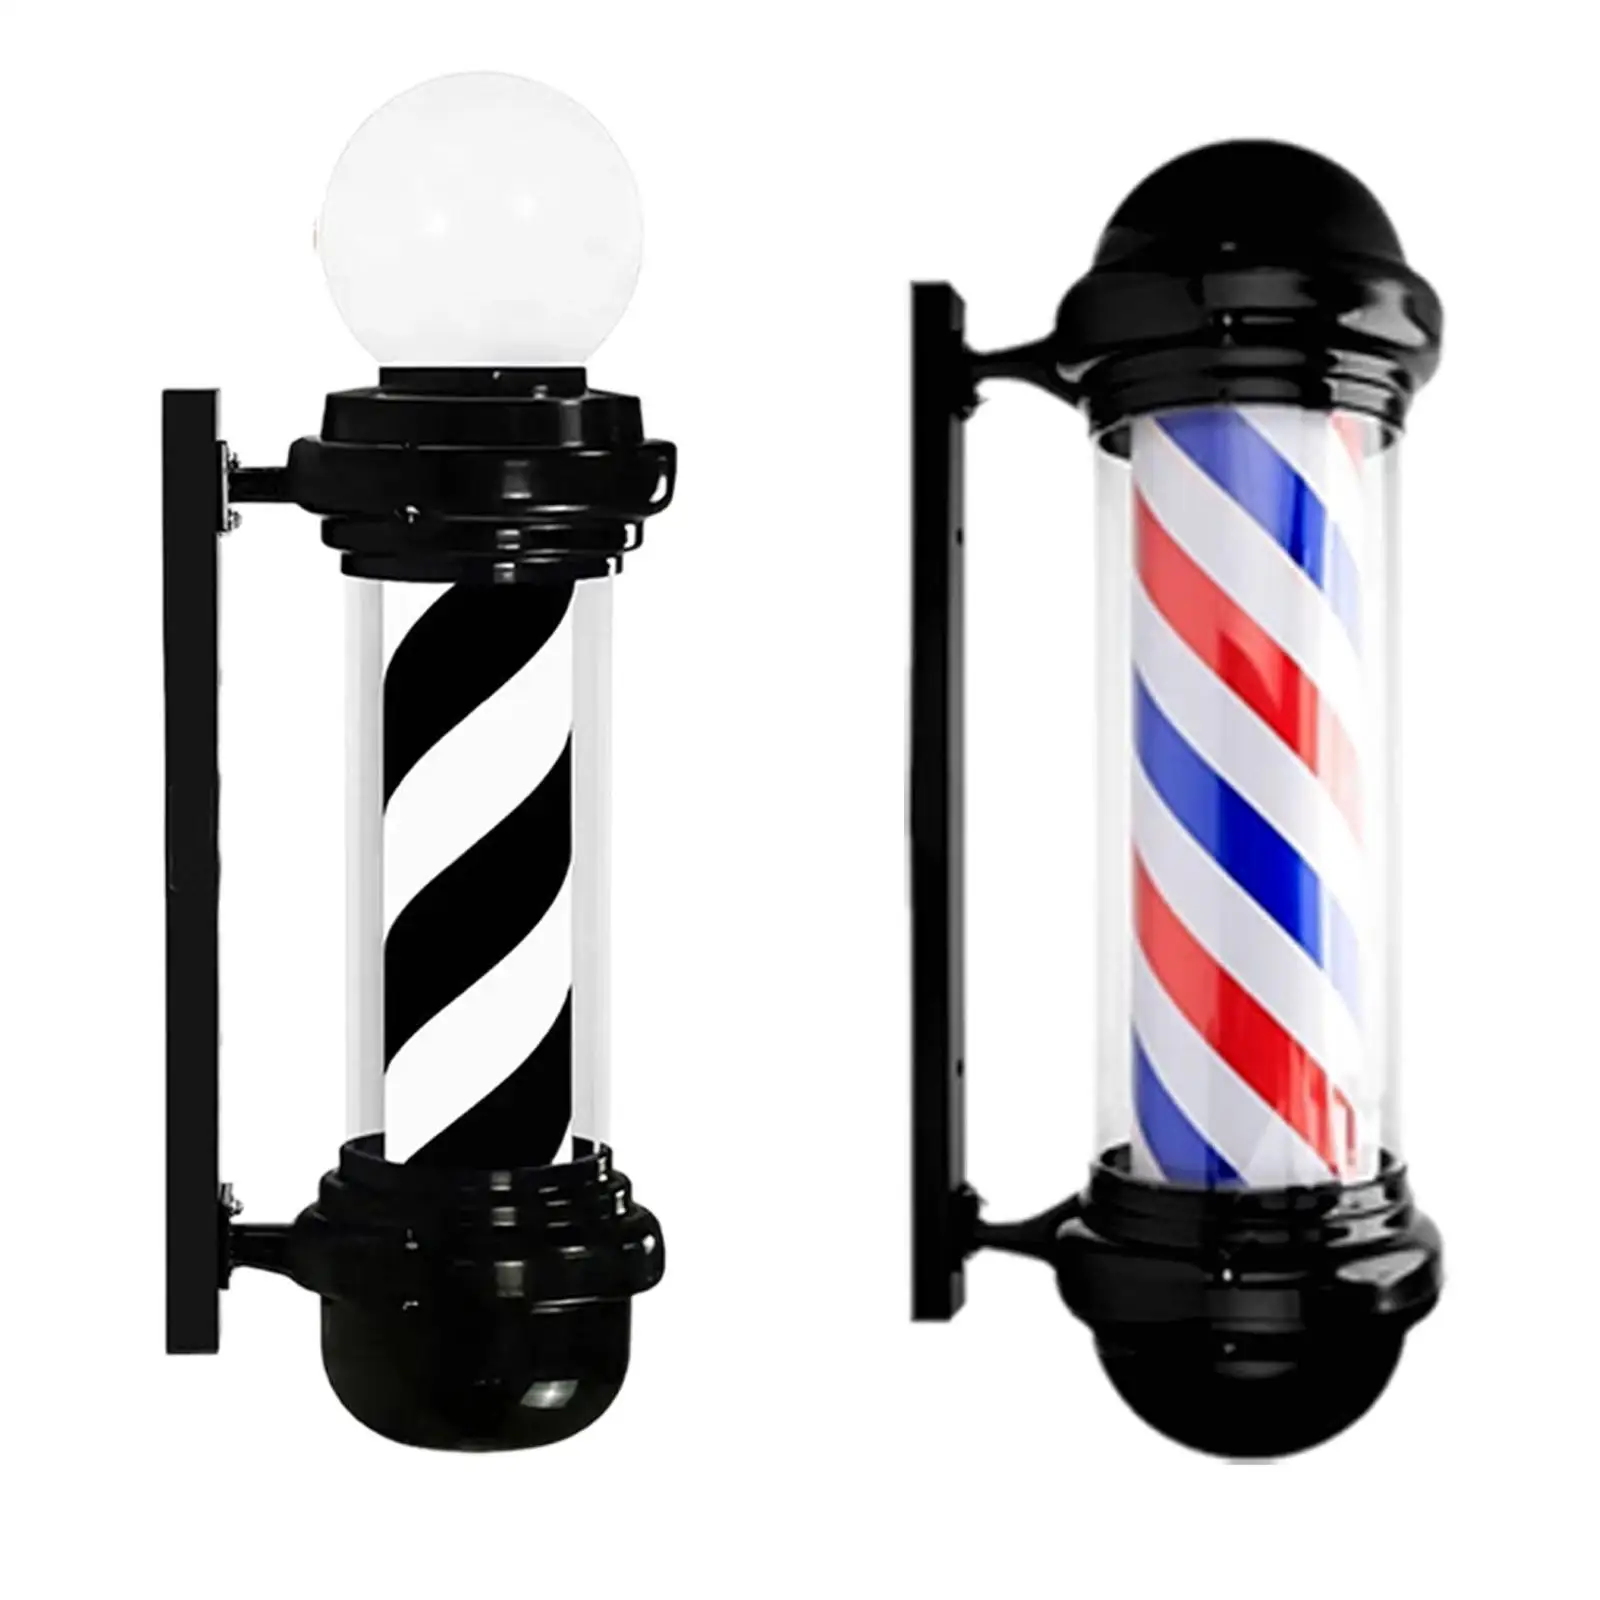 

Barber Pole Light Styling Accessories Waterproof Sturdy Wall Hanging Retro Design LED Barber for Beauty Salon Barbershop Outside